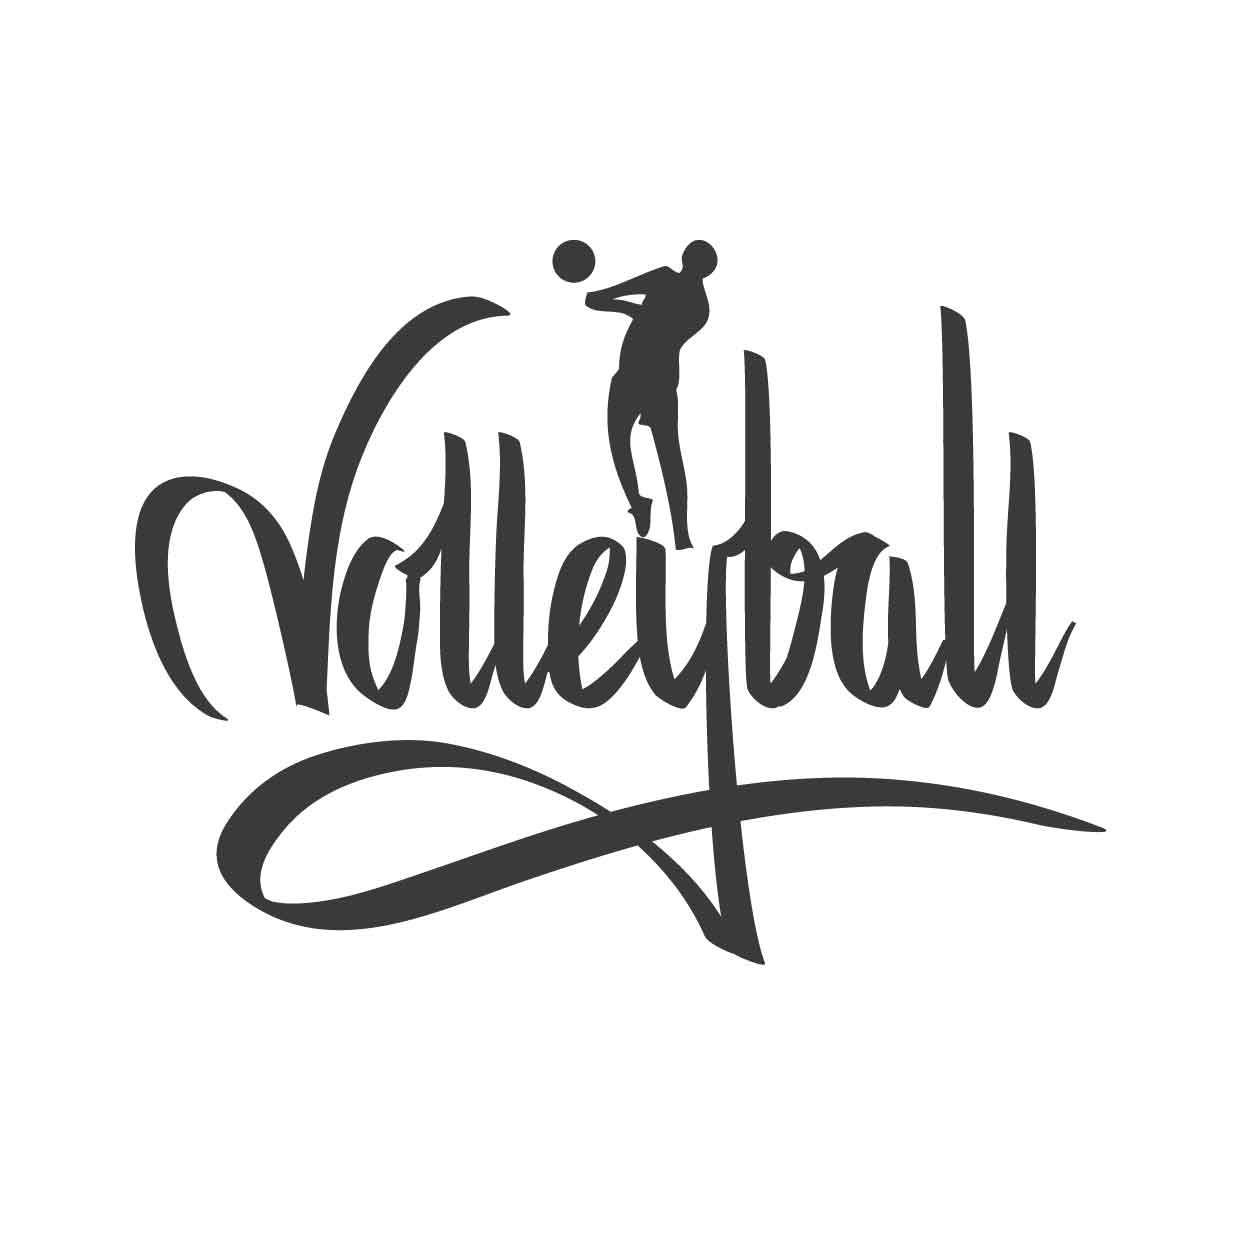 Free Volleyball, Download Free